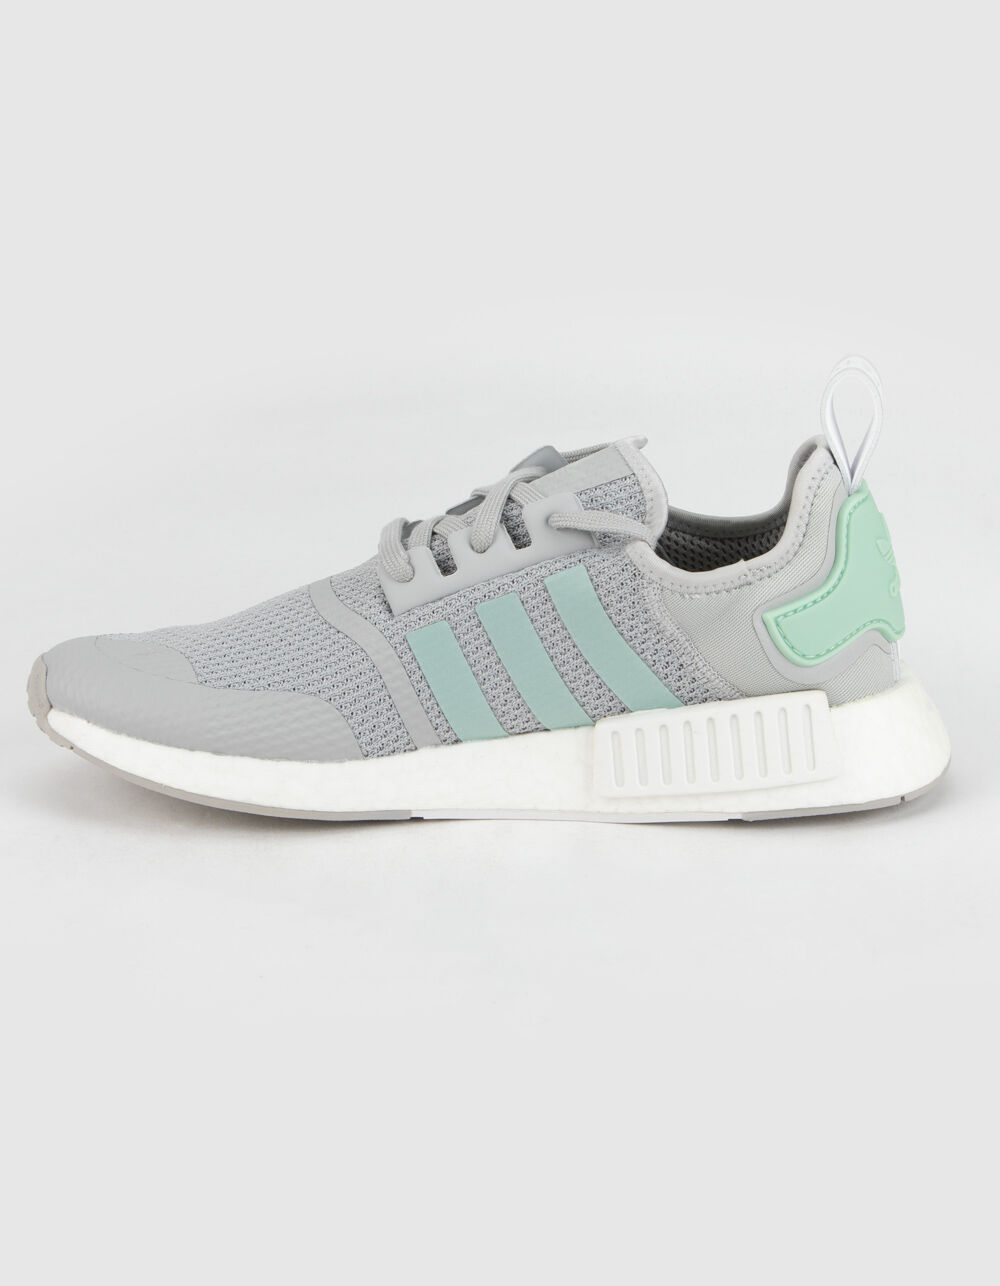 ADIDAS NMD_R1 Gray & Mint Shoes - GRAY/MINT | Tillys